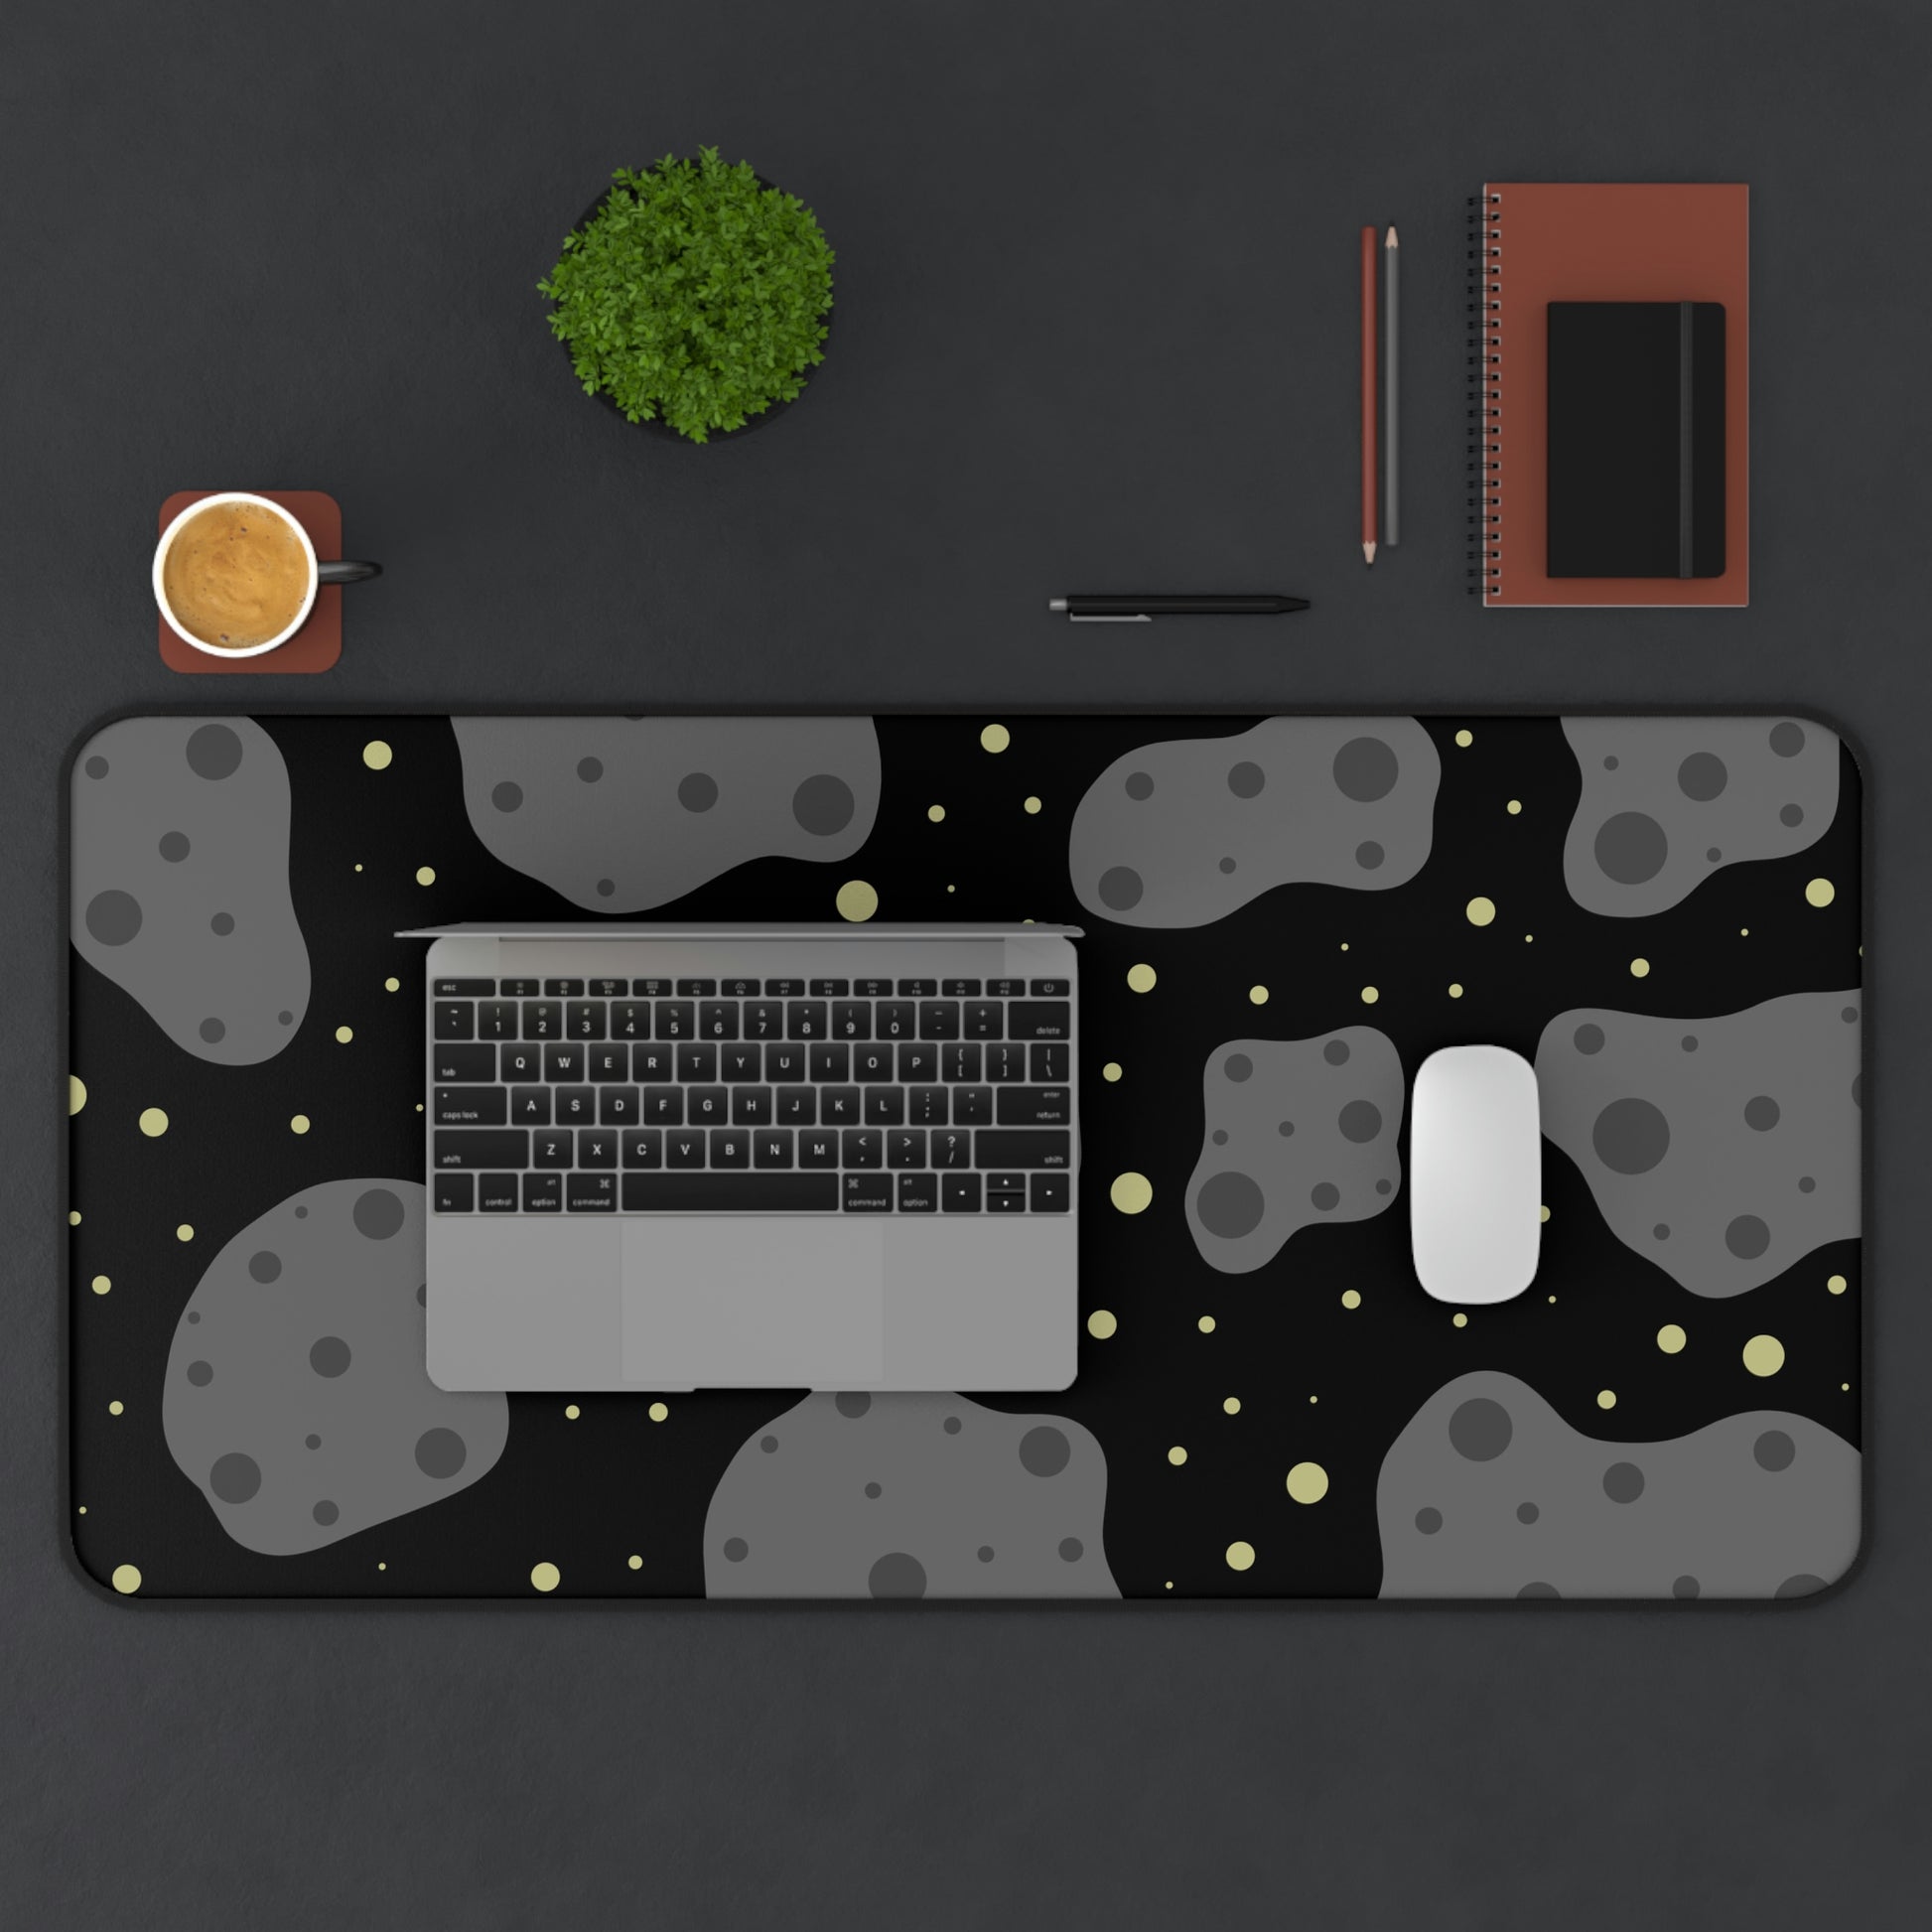 A 31" x 15.5" desk mat with a black background, gray asteroids, and yellow stars. A laptop and mouse sit on top of it.